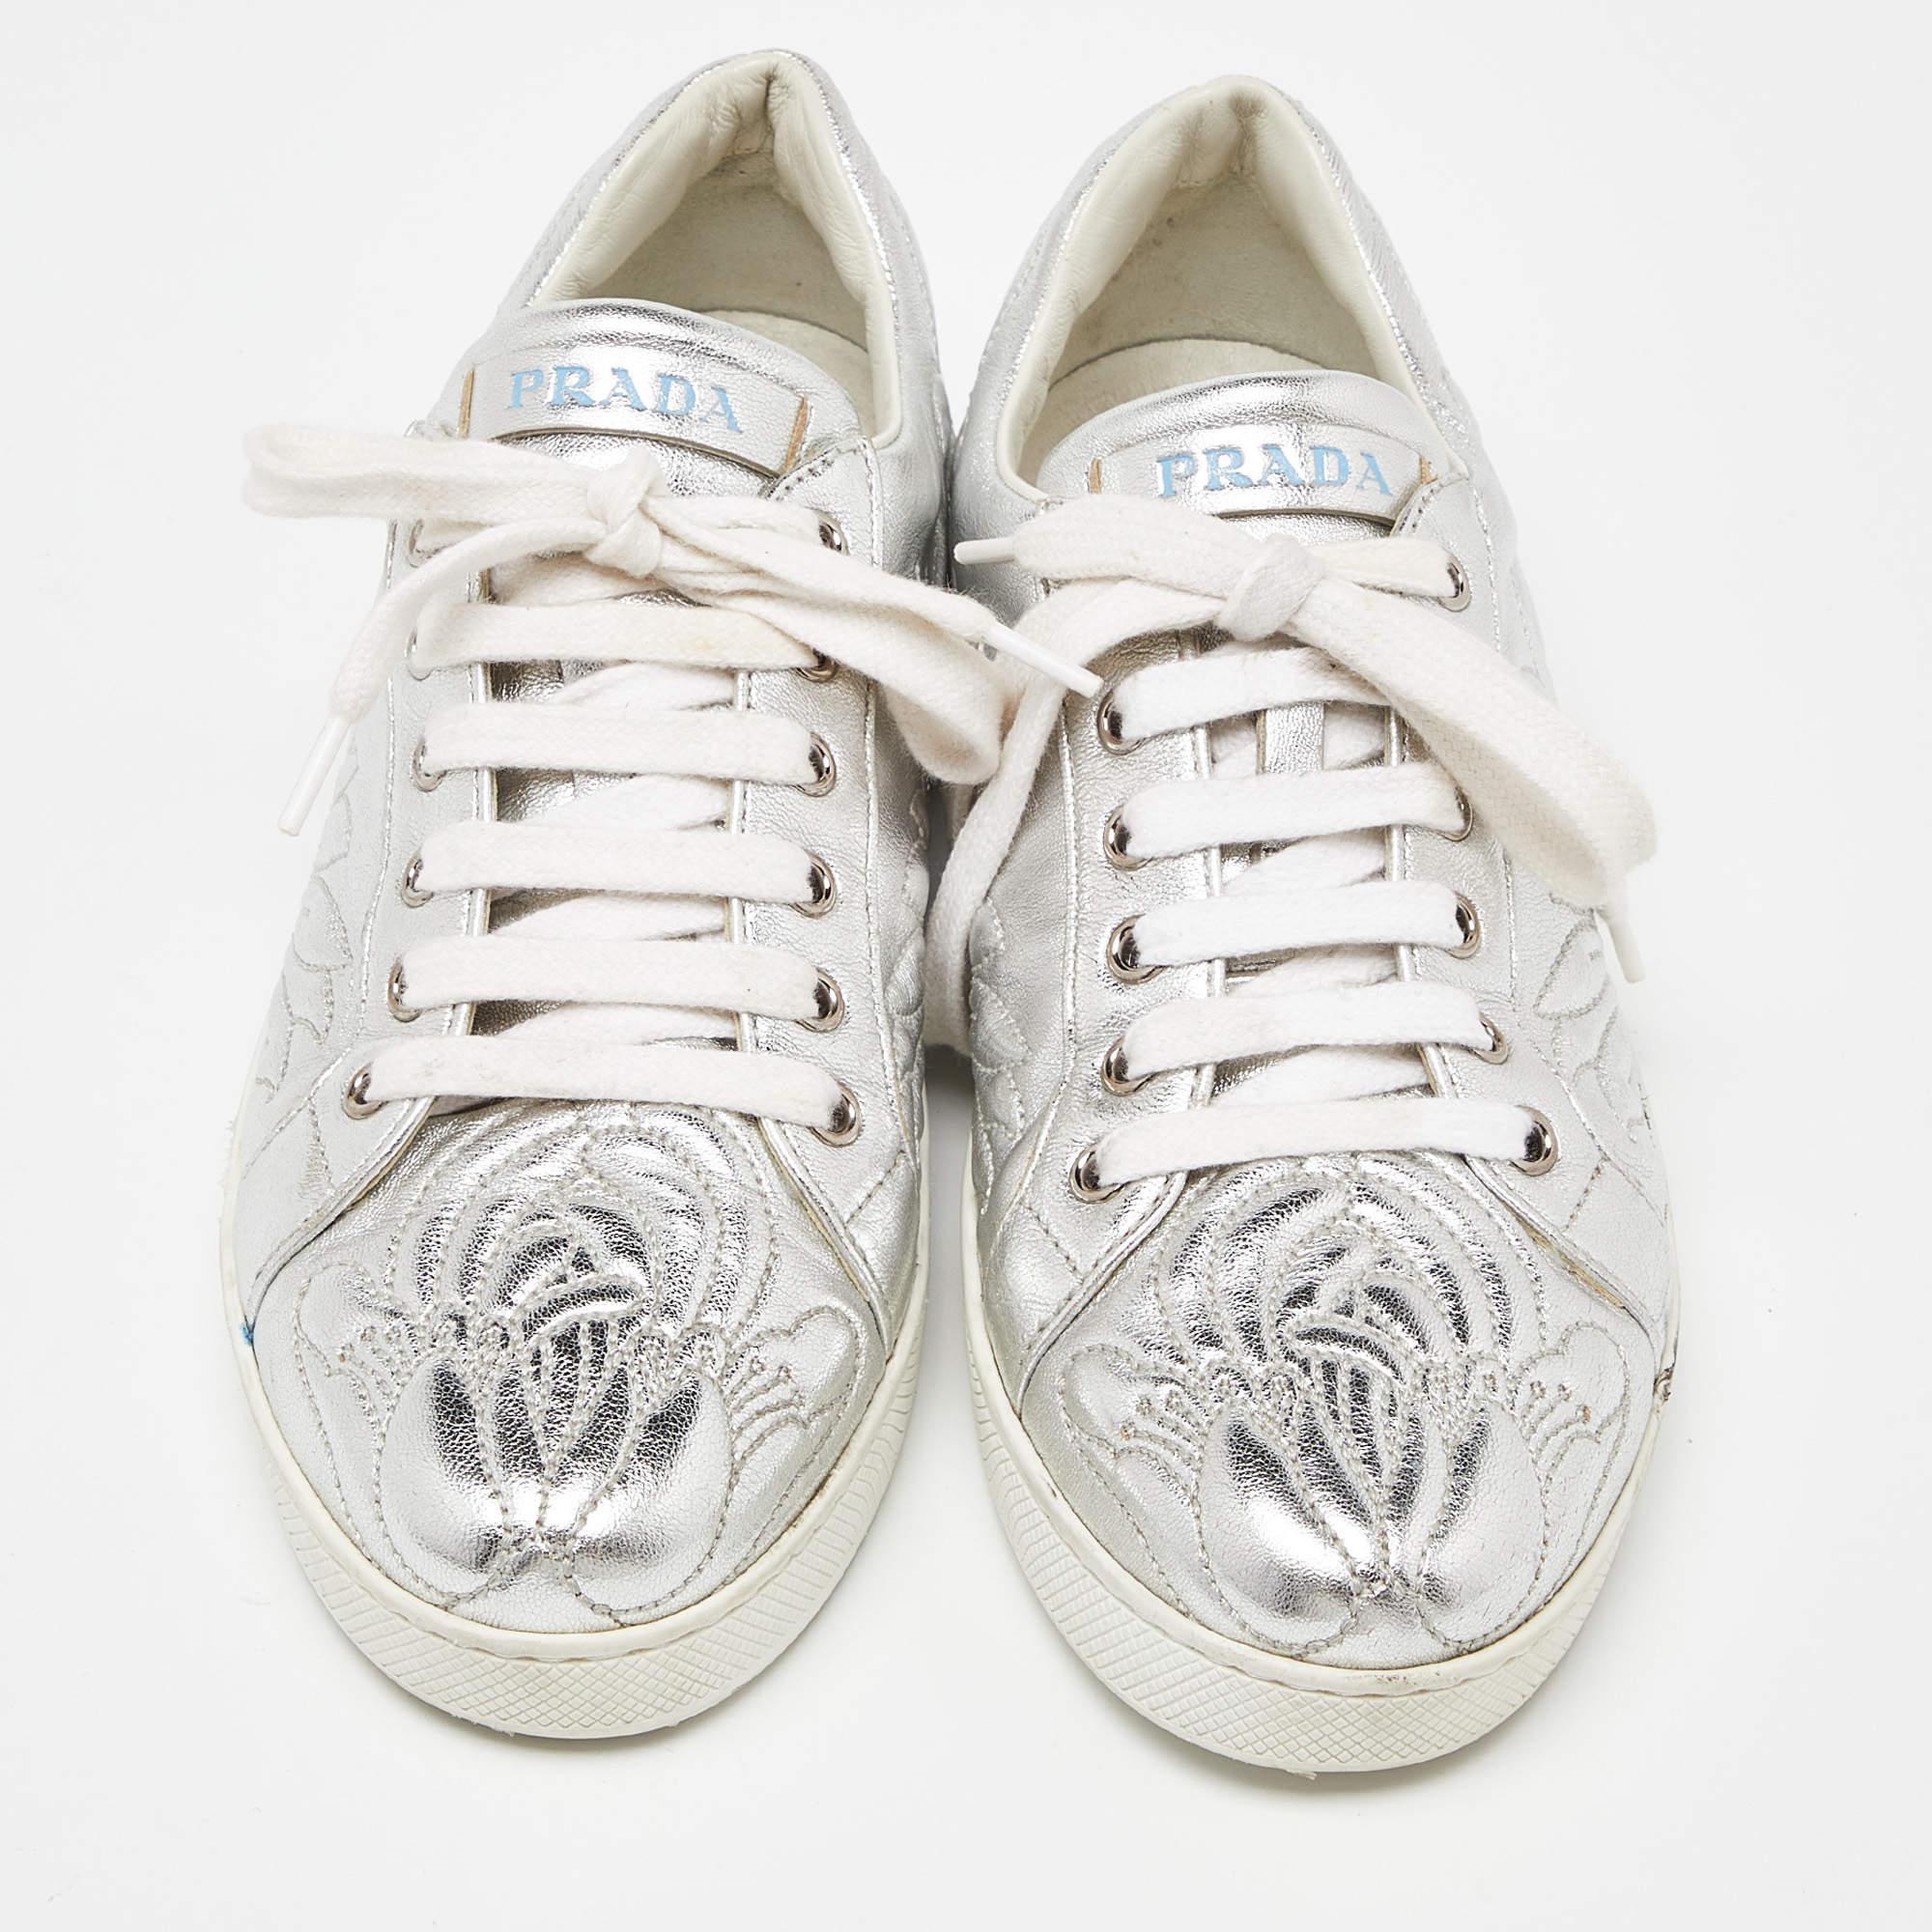 Prada Silver Embroidered Leather Low Top Sneakers Size 38 In Good Condition For Sale In Dubai, Al Qouz 2